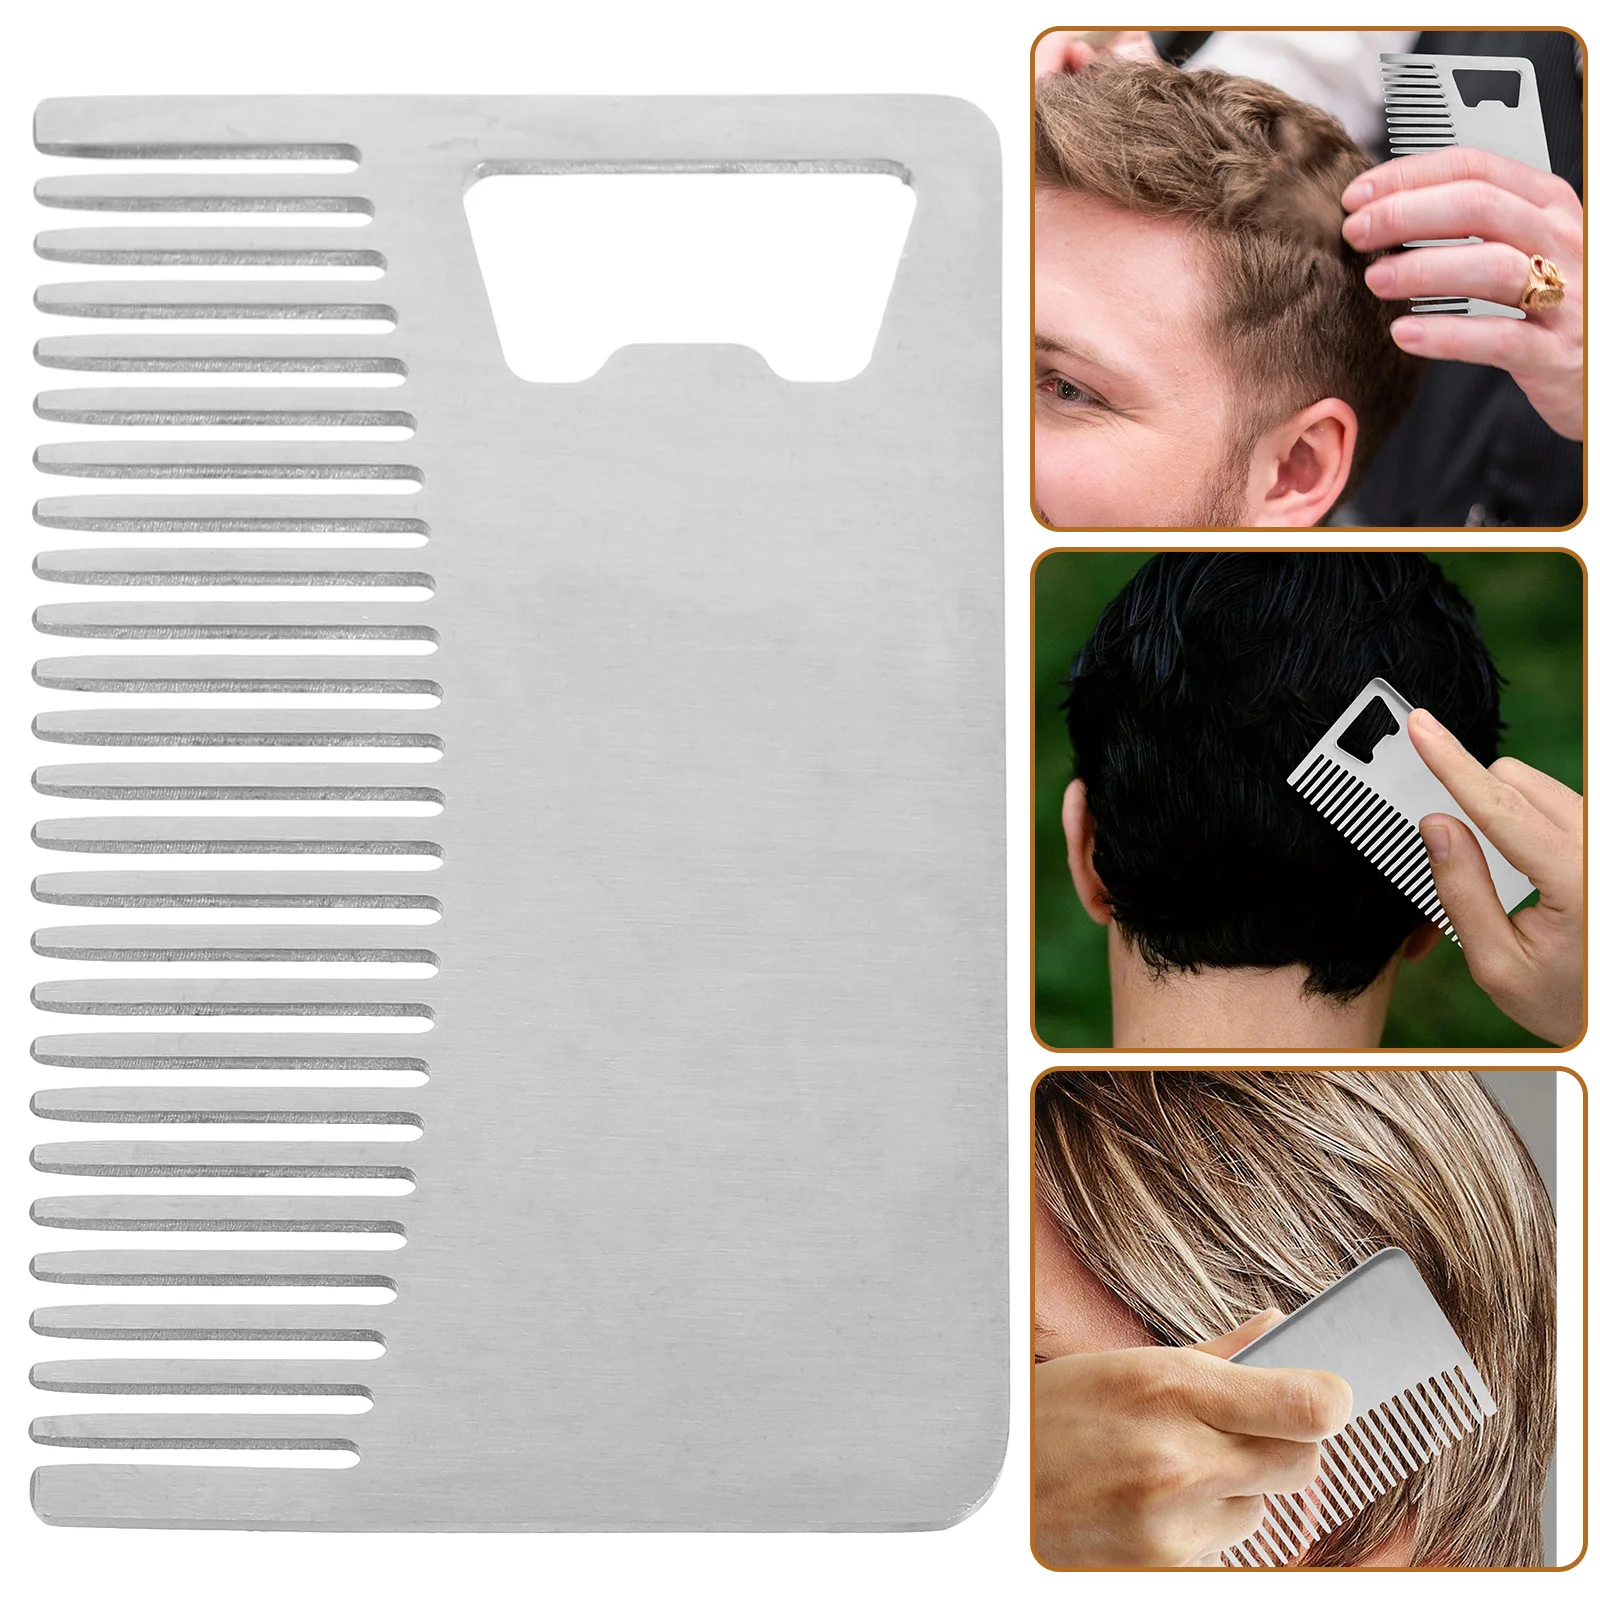 

Unbreakable Comb Travel Barber Brush Styling for Men Combs Stainless Steel Hair Stylist